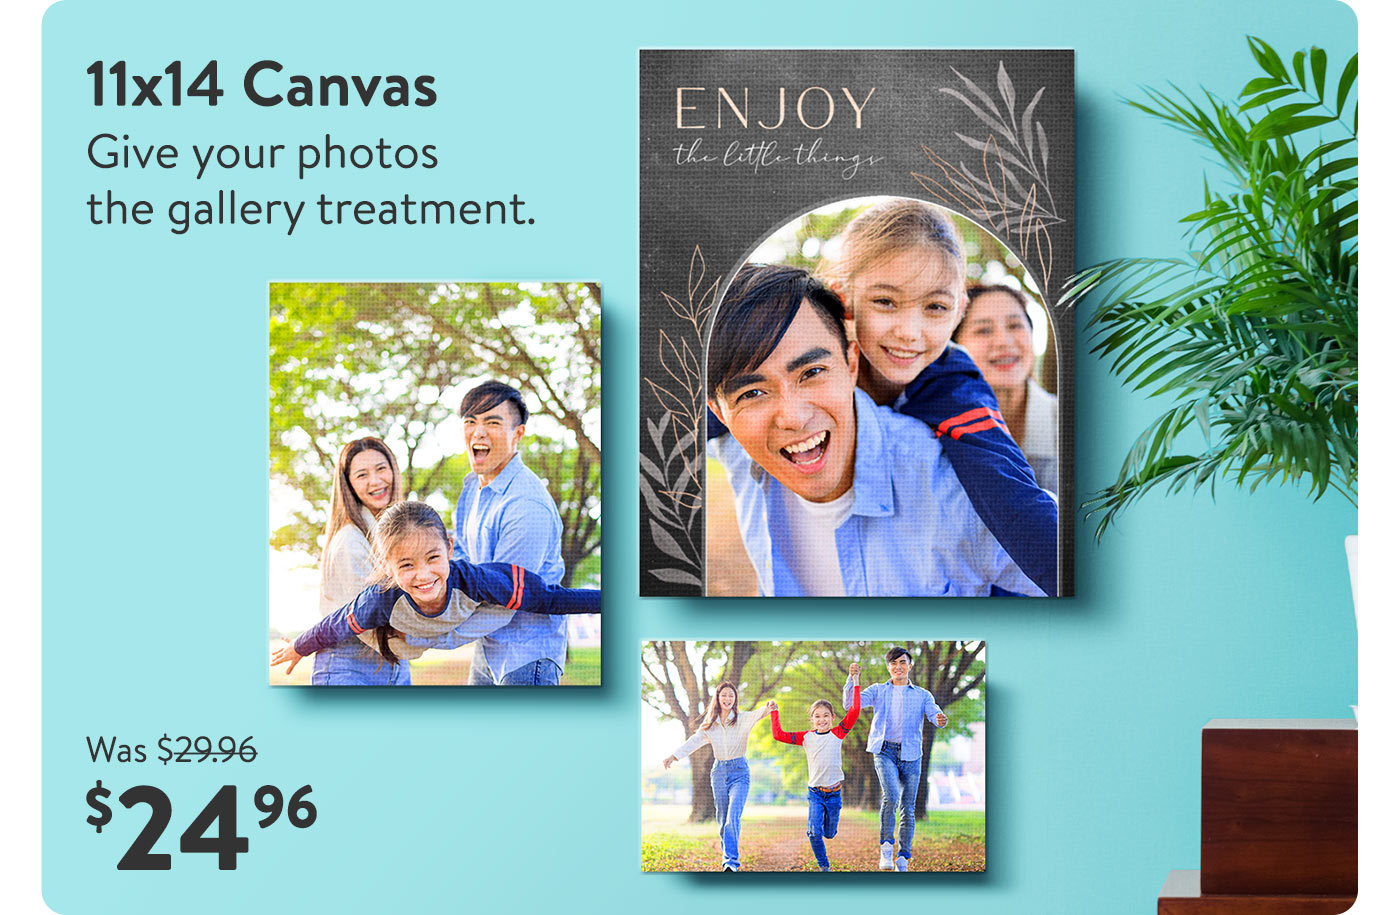 11x14 Canvas $24.96, was $29.96